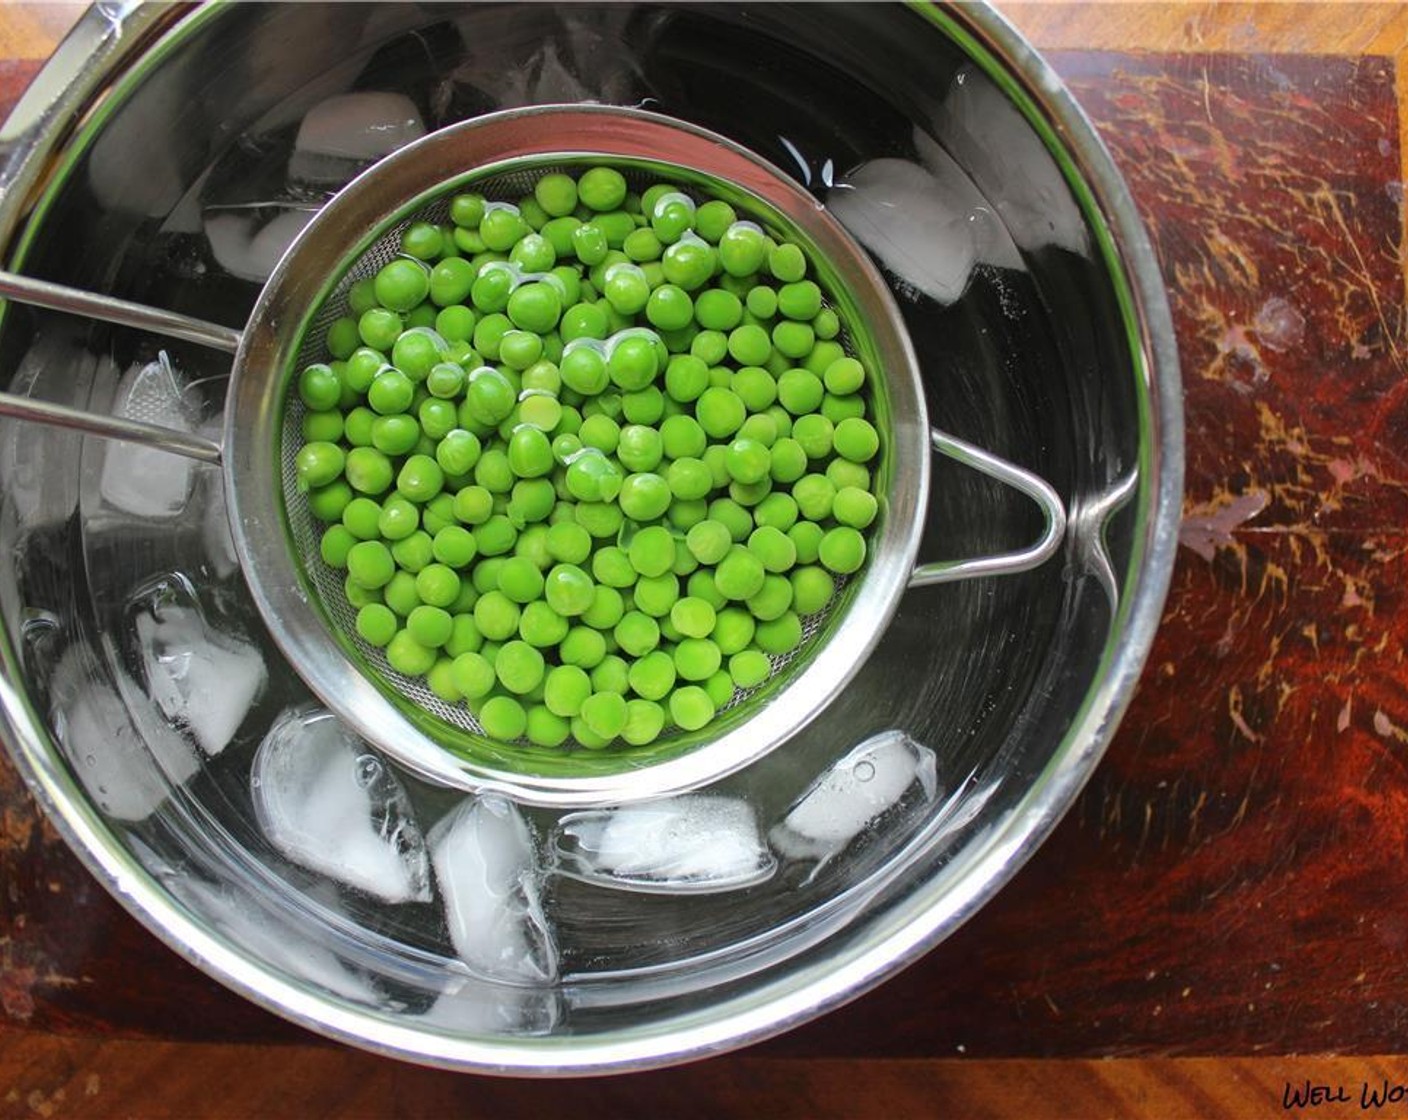 step 3 Bring a medium pot of salted water to a boil, and prepare an ice bath. Put the Frozen Green Peas (7 cups) in the water and cook for 45 seconds to 1 minute.  Strain the peas and put in an ice bath for 30 seconds to stop the cooking process.